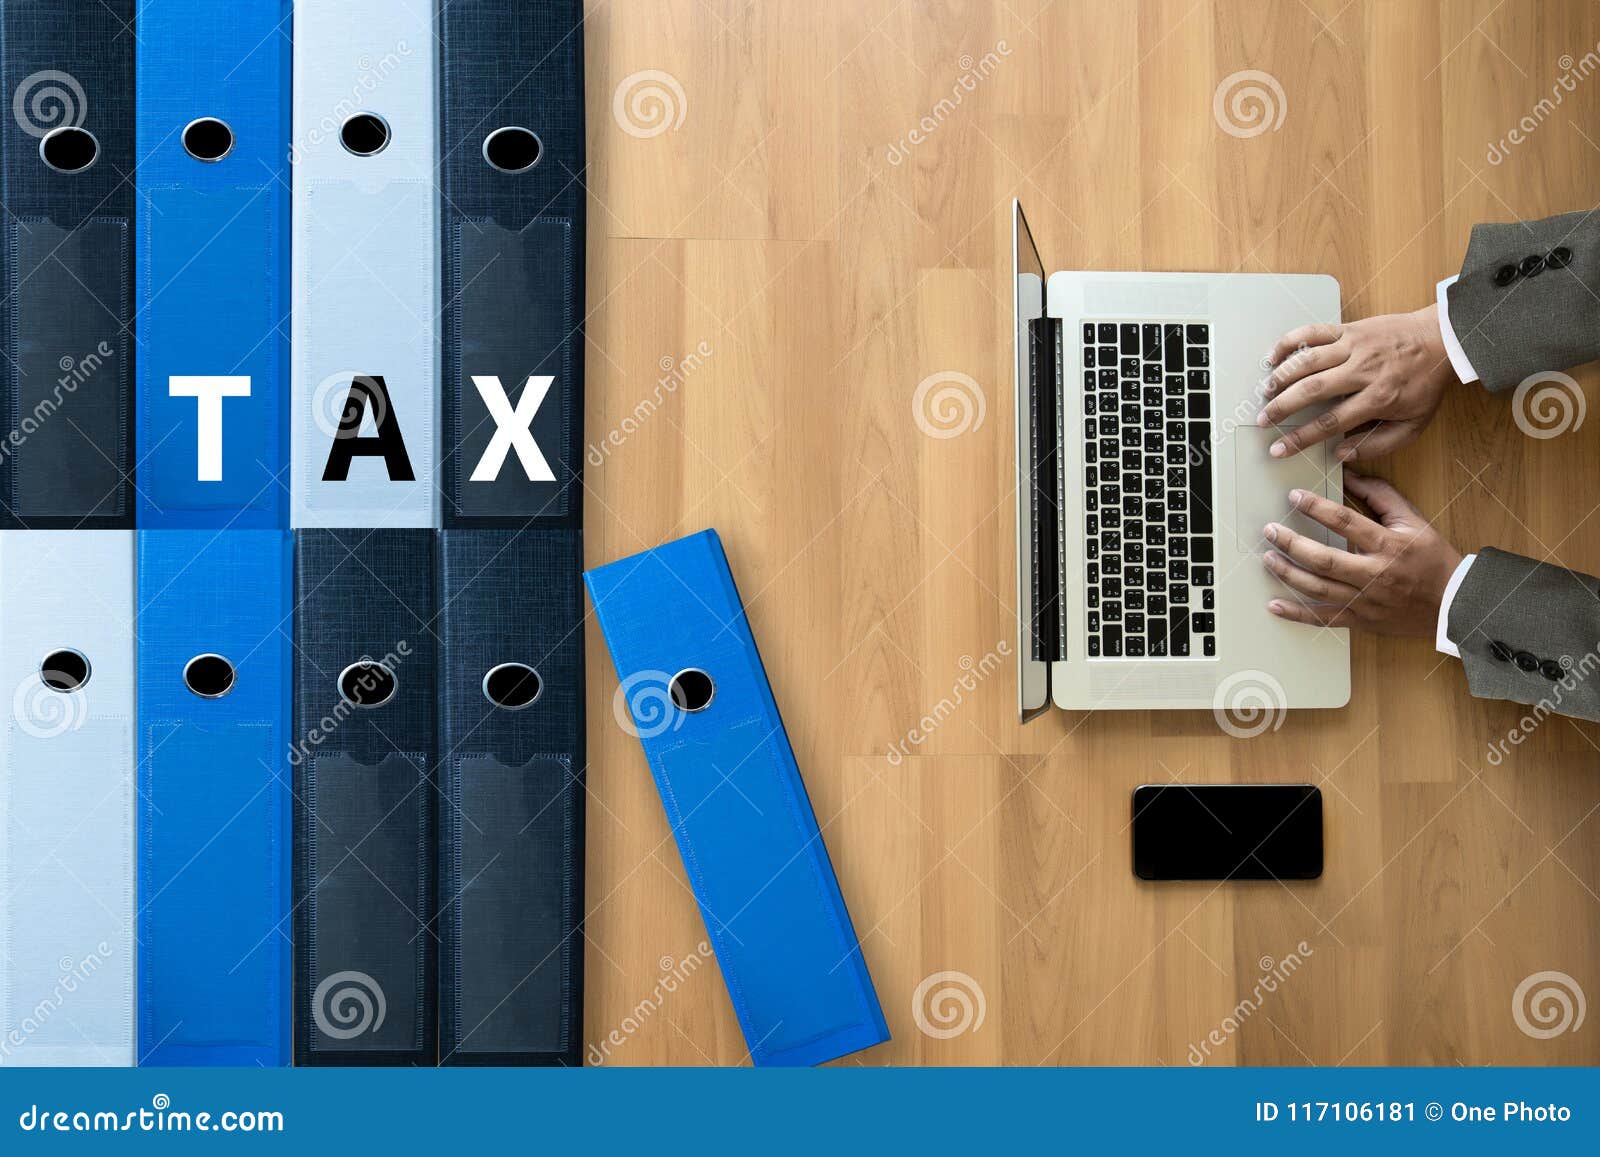 tax-concept-business-analyzing-individual-income-tax-return-form-stock